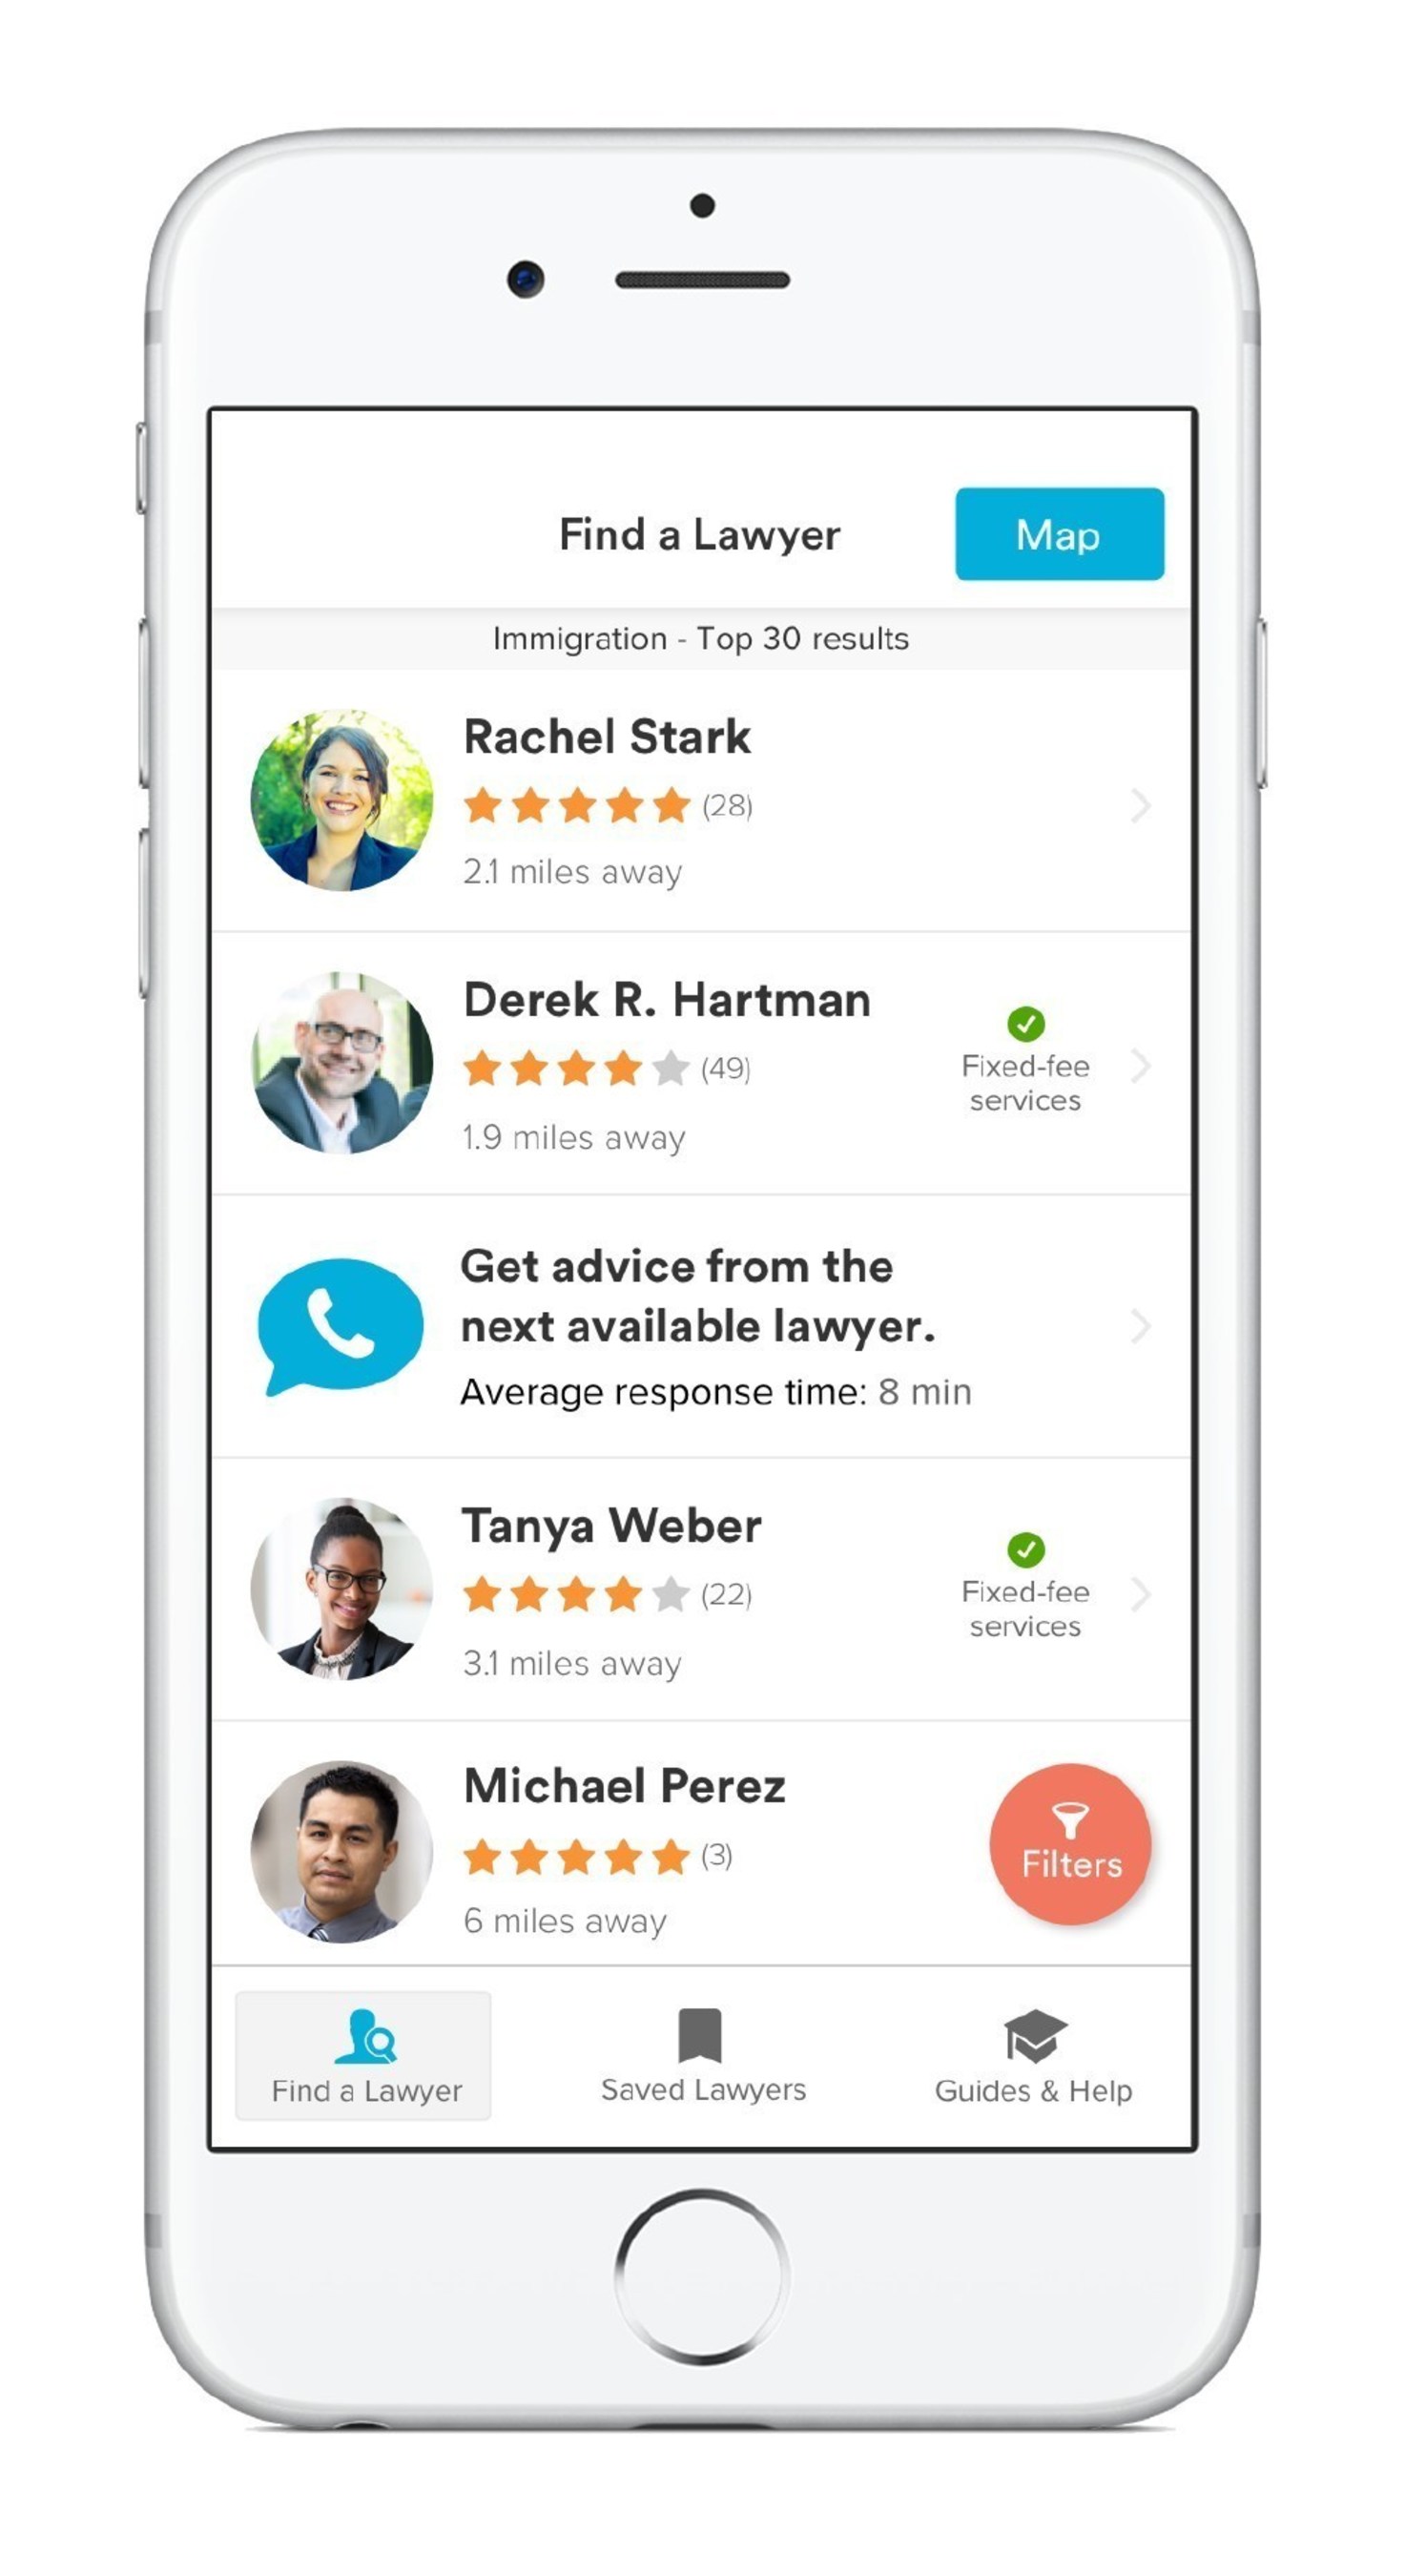 Avvo app with searchable lawyer profiles by location, practice area, consumer rating